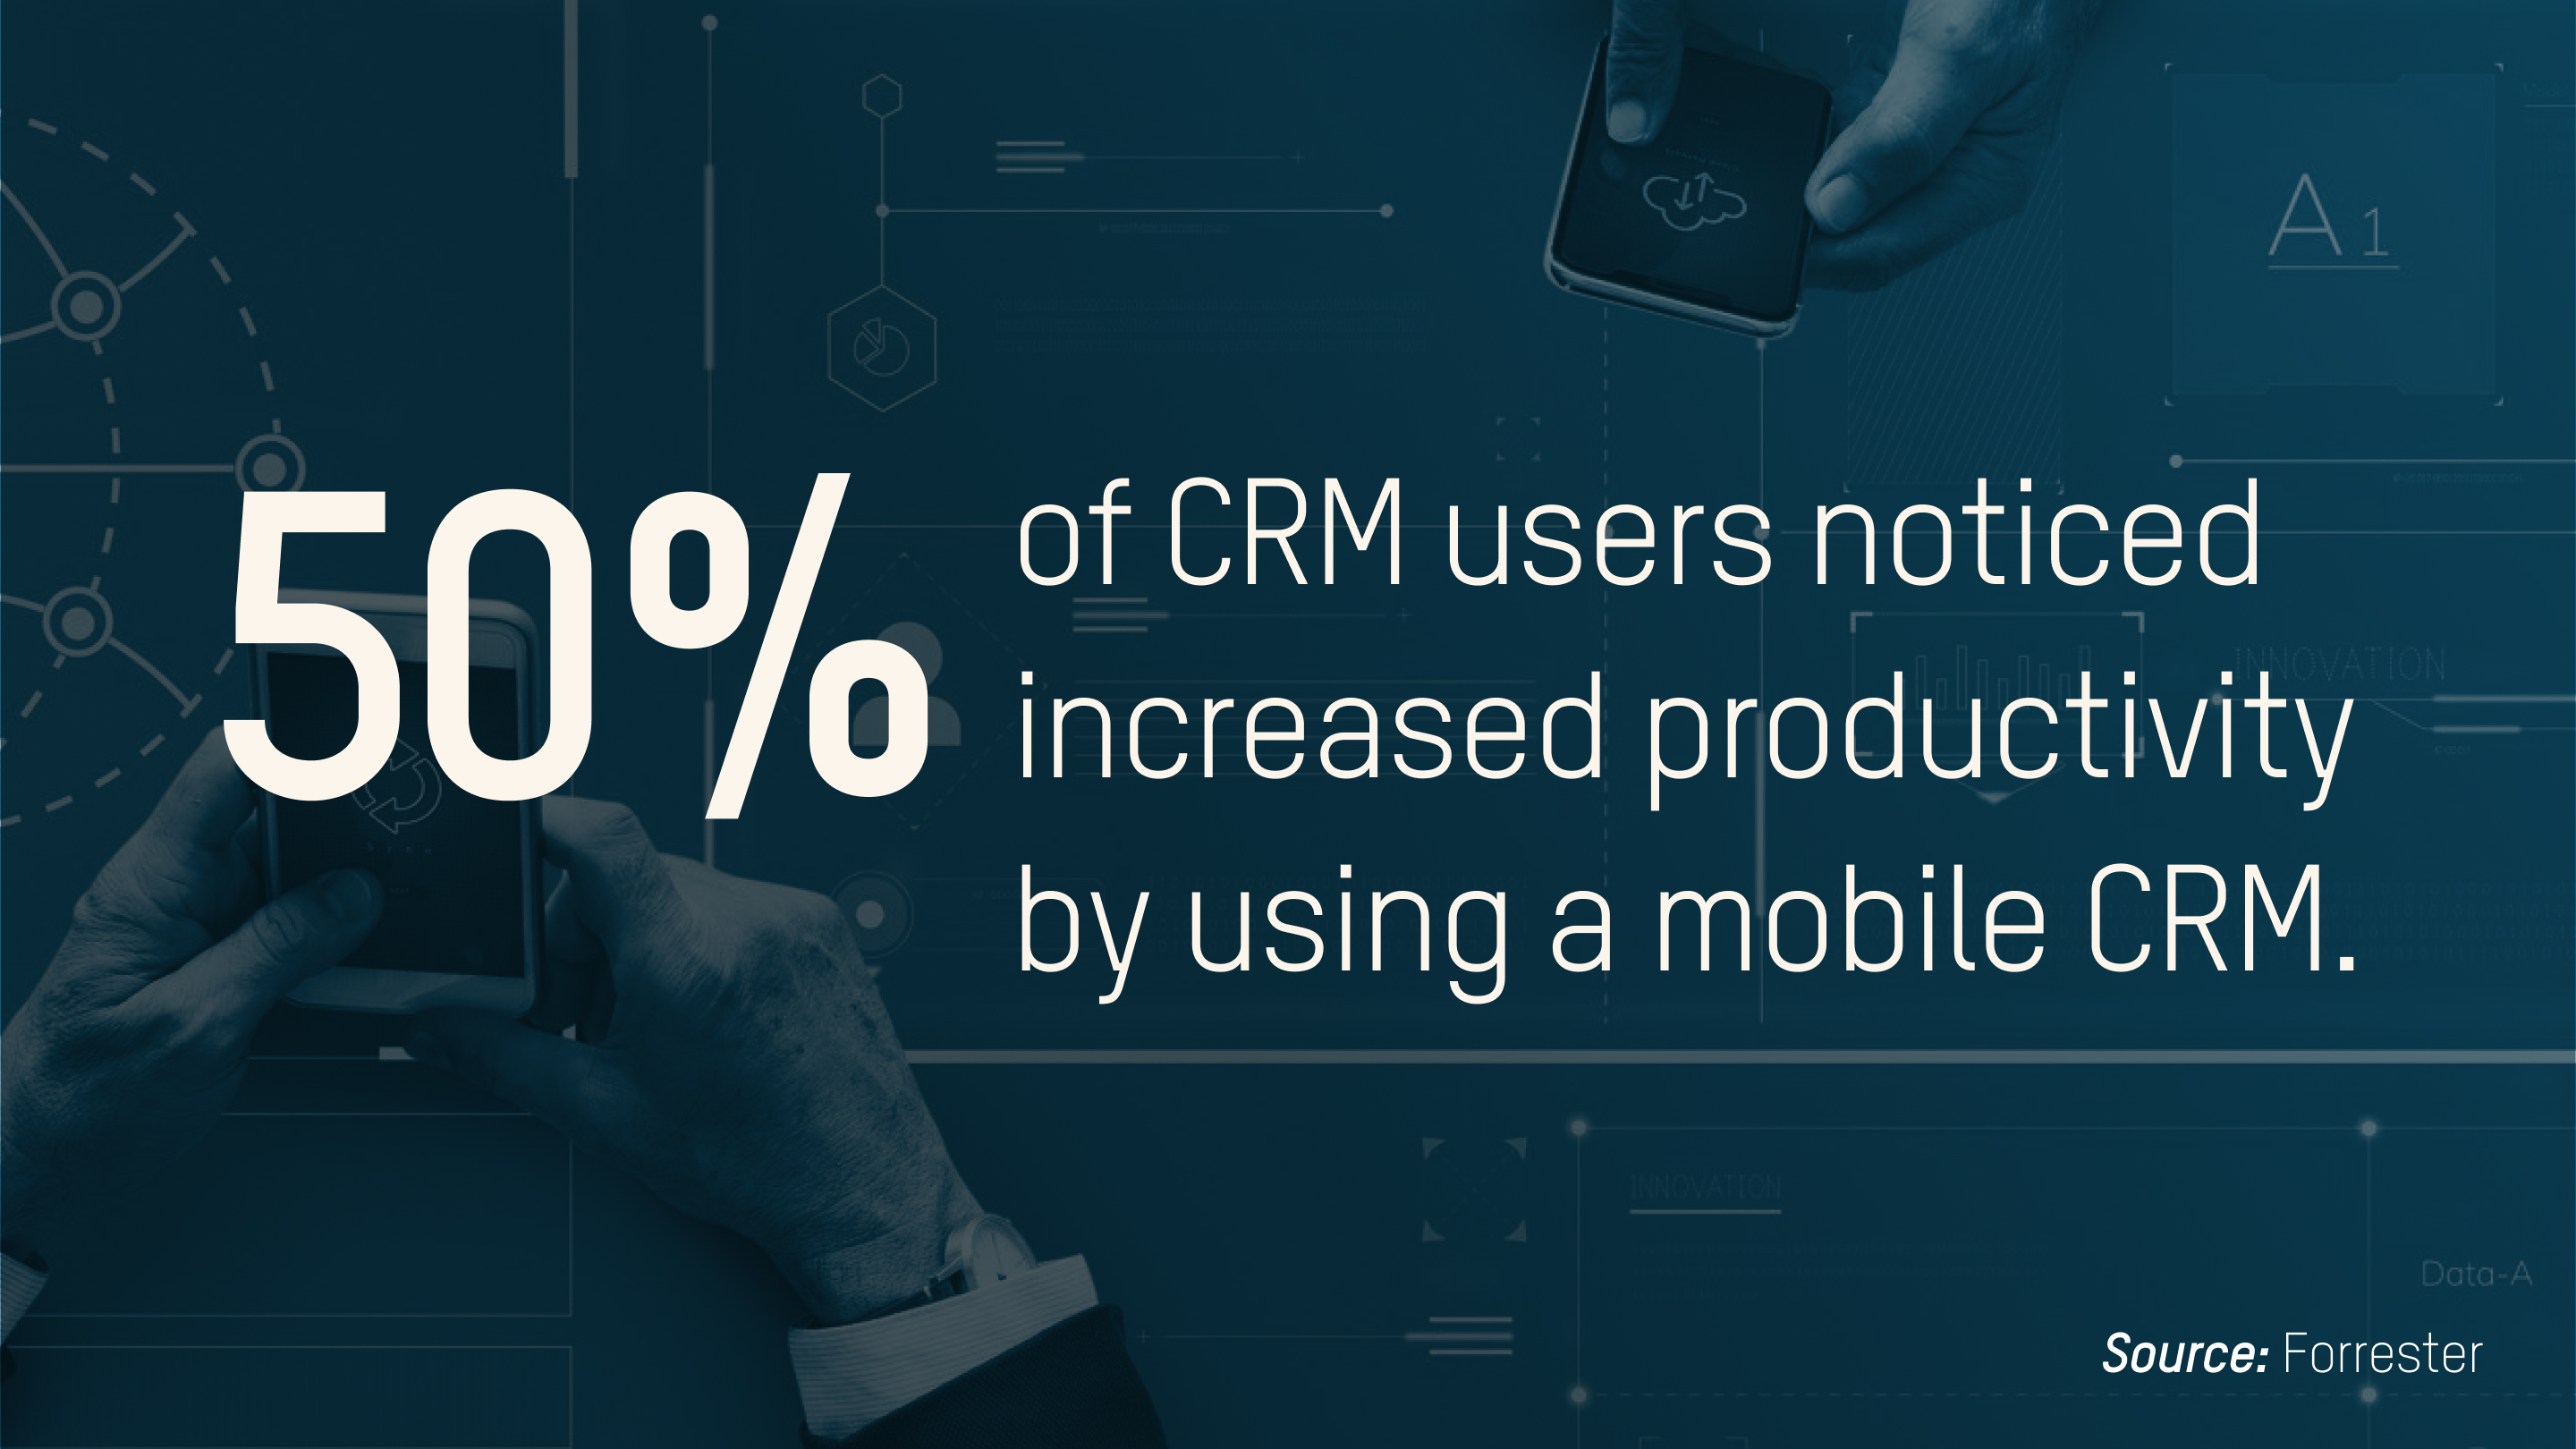 50% of CRM users noticed increased productivity by using a mobile CRM.